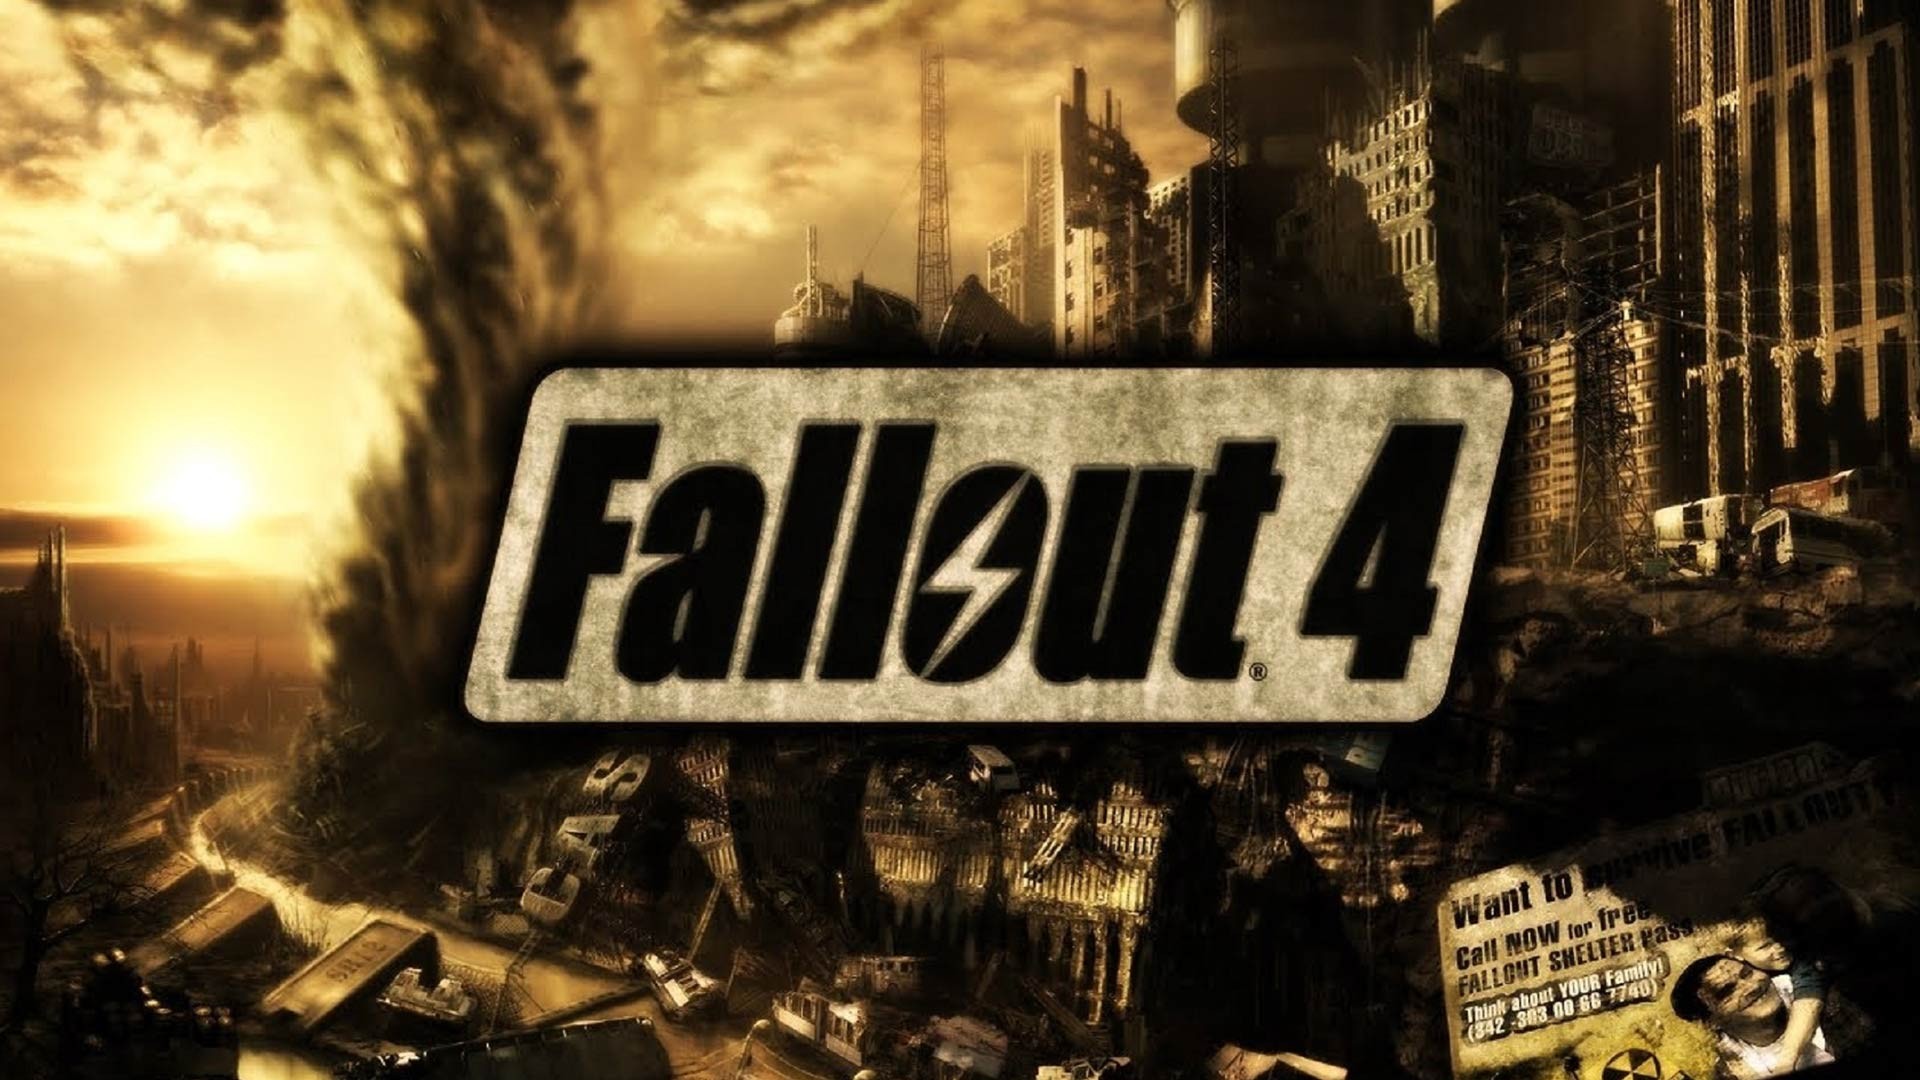 General 1920x1080 Fallout 4 Fallout video games numbers PC gaming